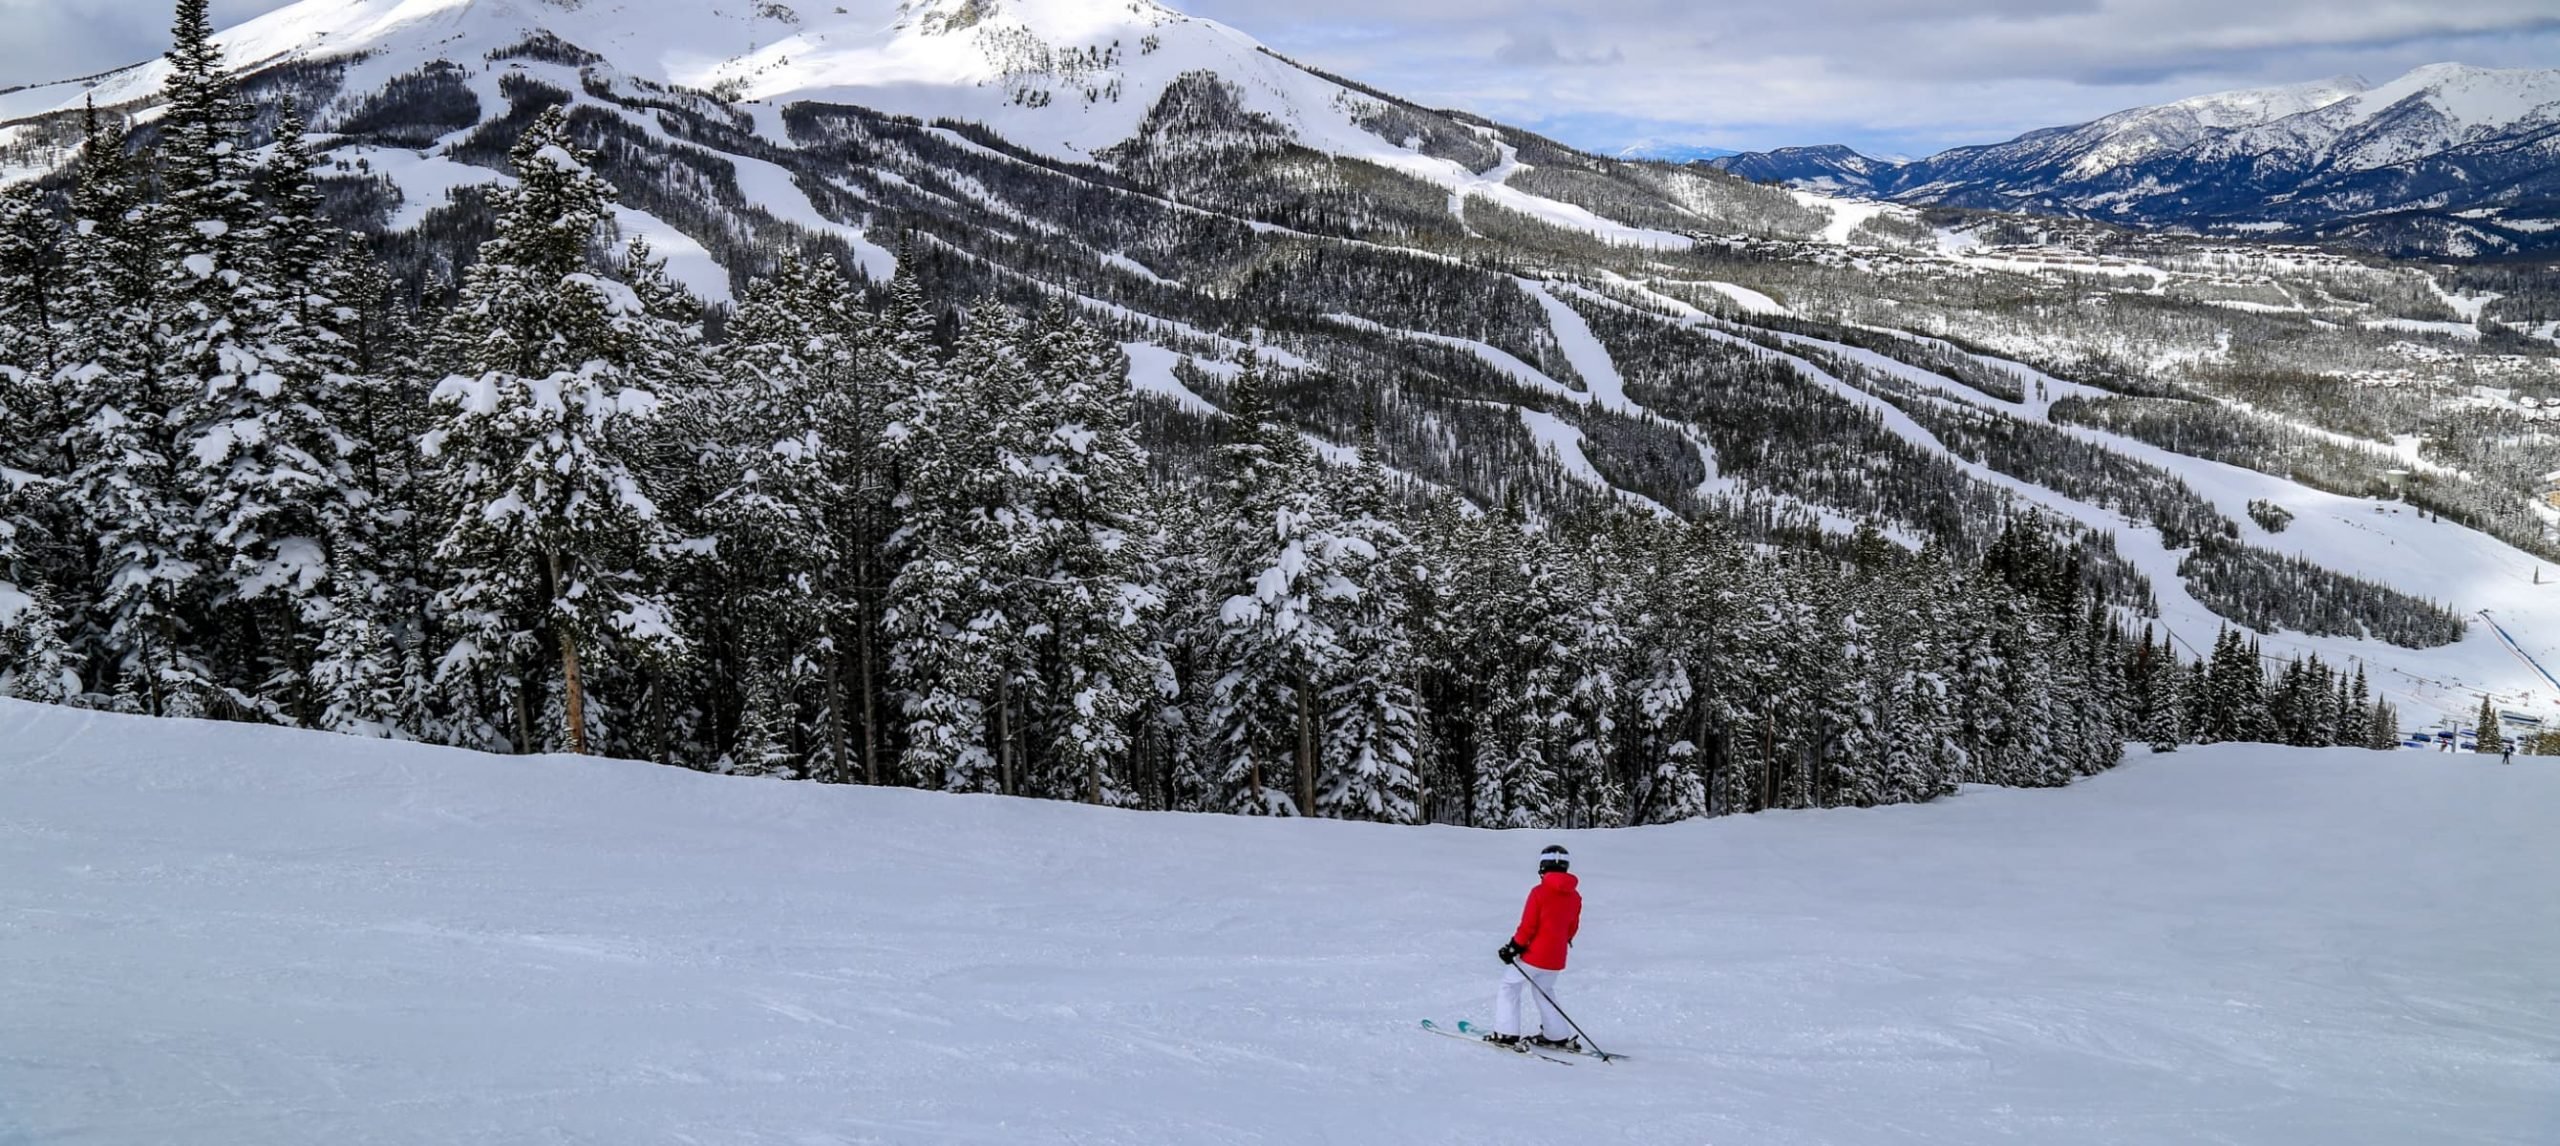 one of the best ski resorts in the USA